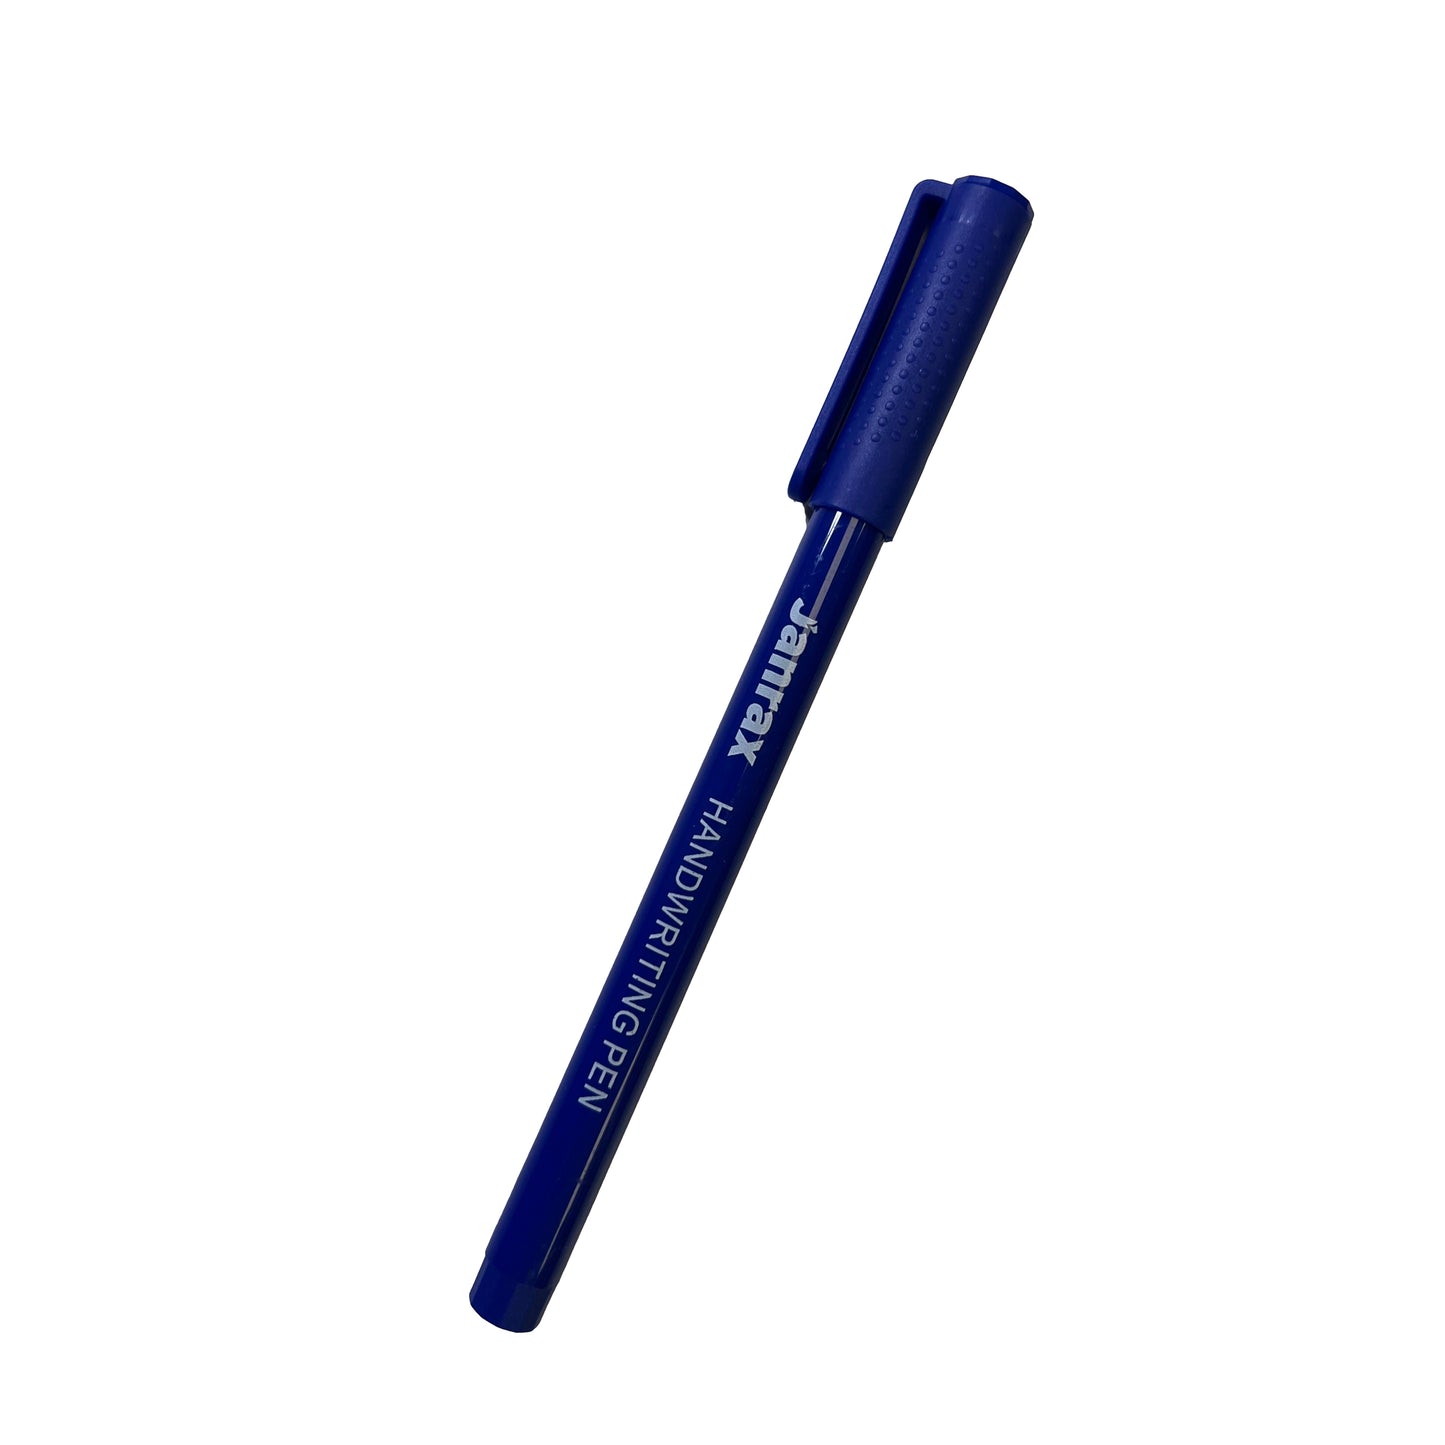 Pack of 12 Blue Handwriting Pens by Janrax